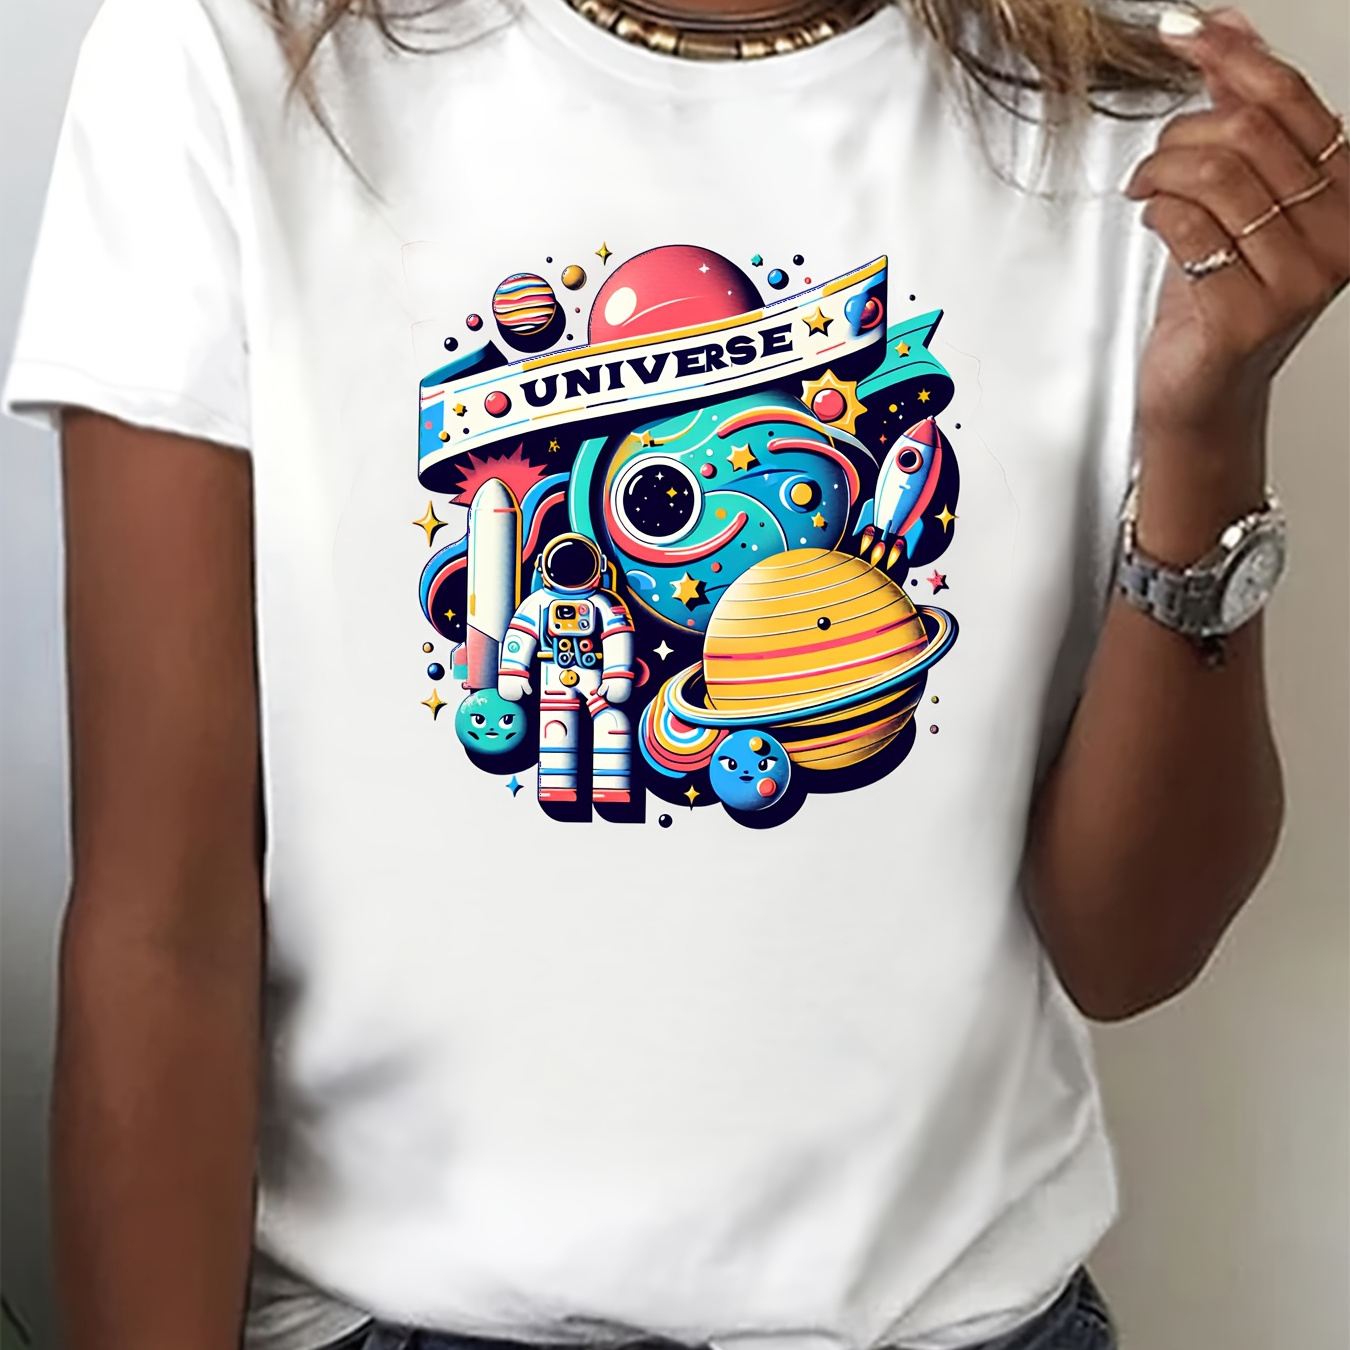 

Astronaut Planet Graphic Print T-shirt, Short Sleeve Crew Neck Casual Top For Summer & Spring, Women's Clothing